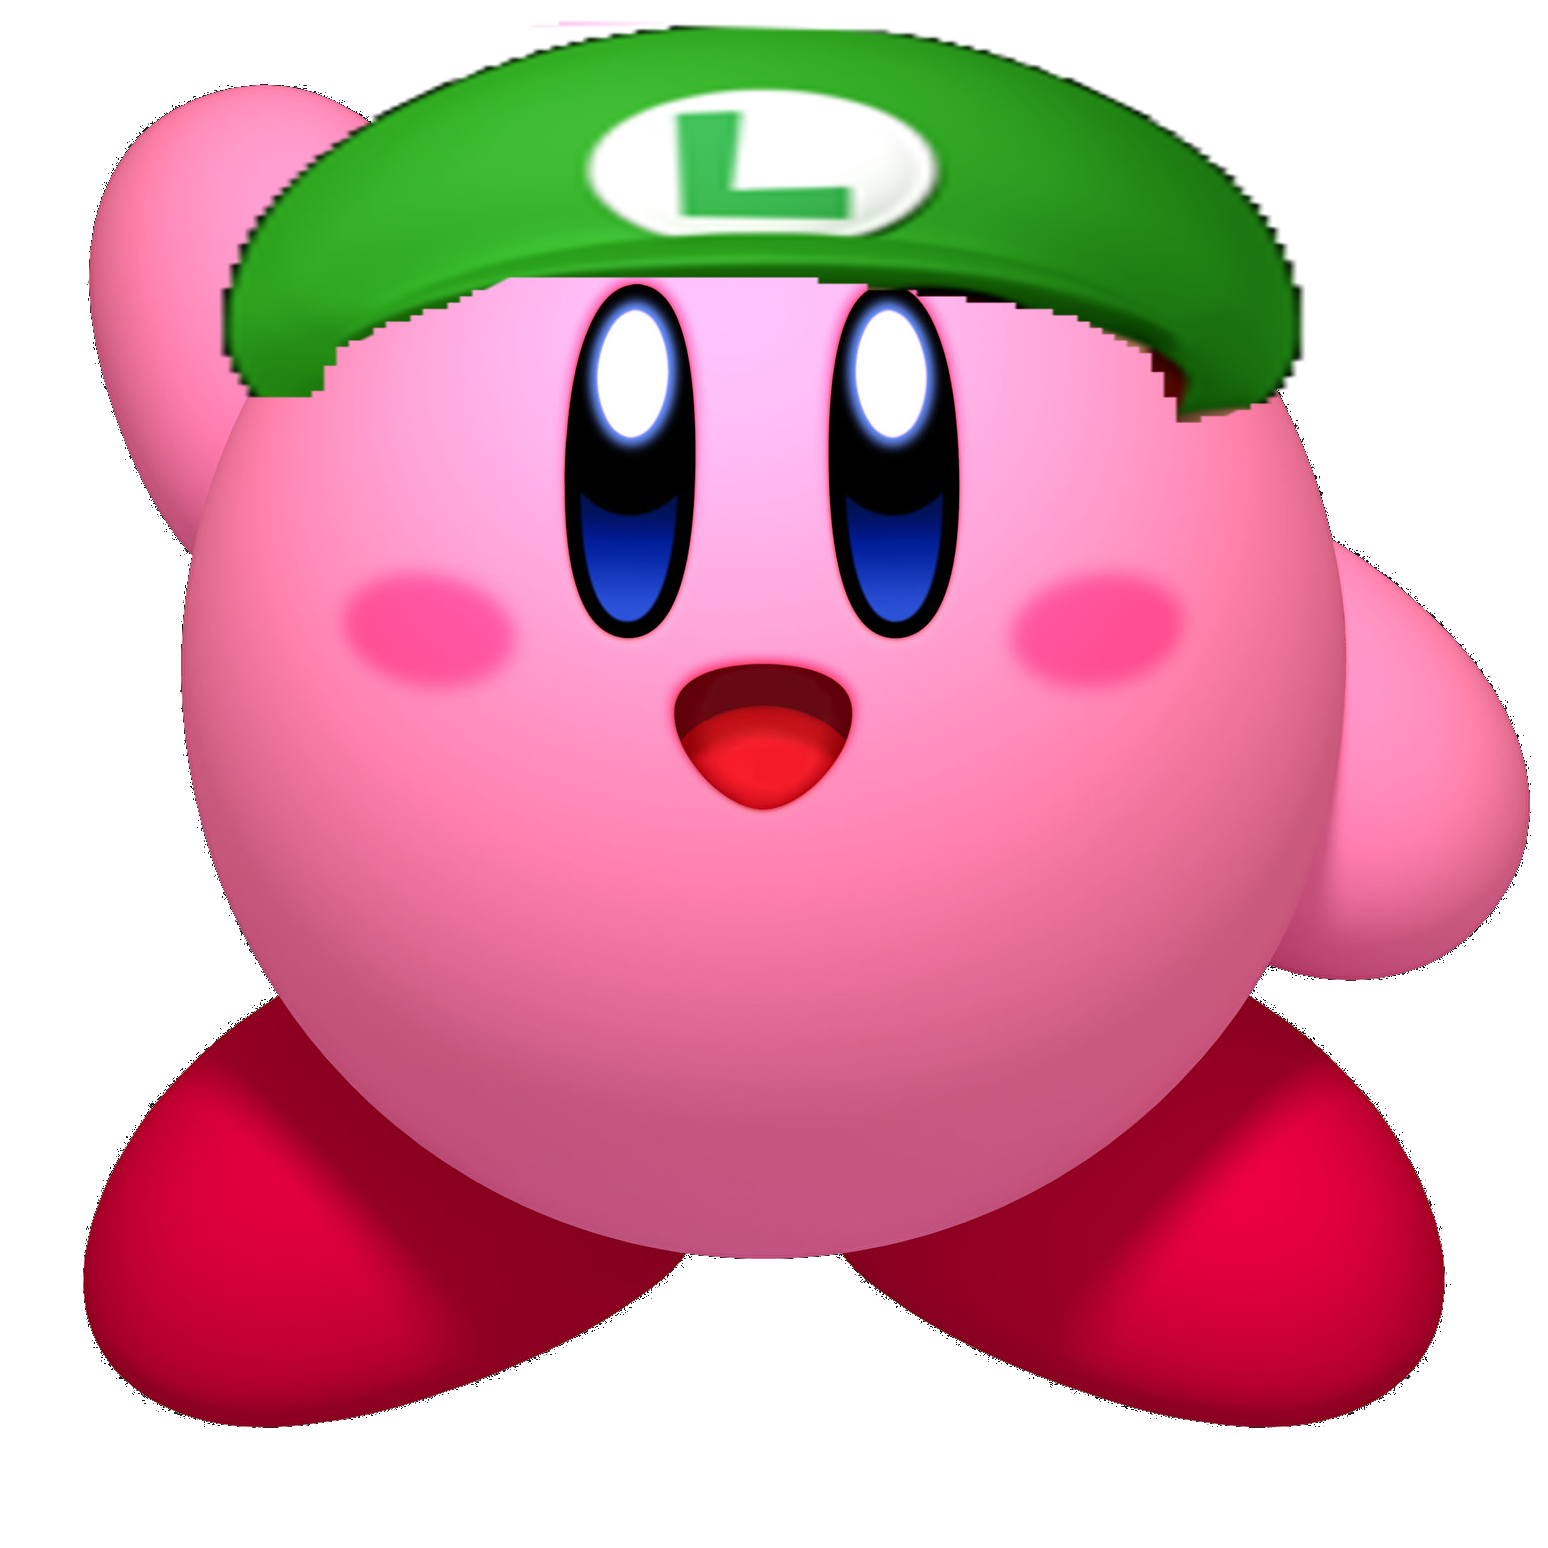 Image Kirby Luigipng Fantendo The Video Game Fanon Wiki 8220